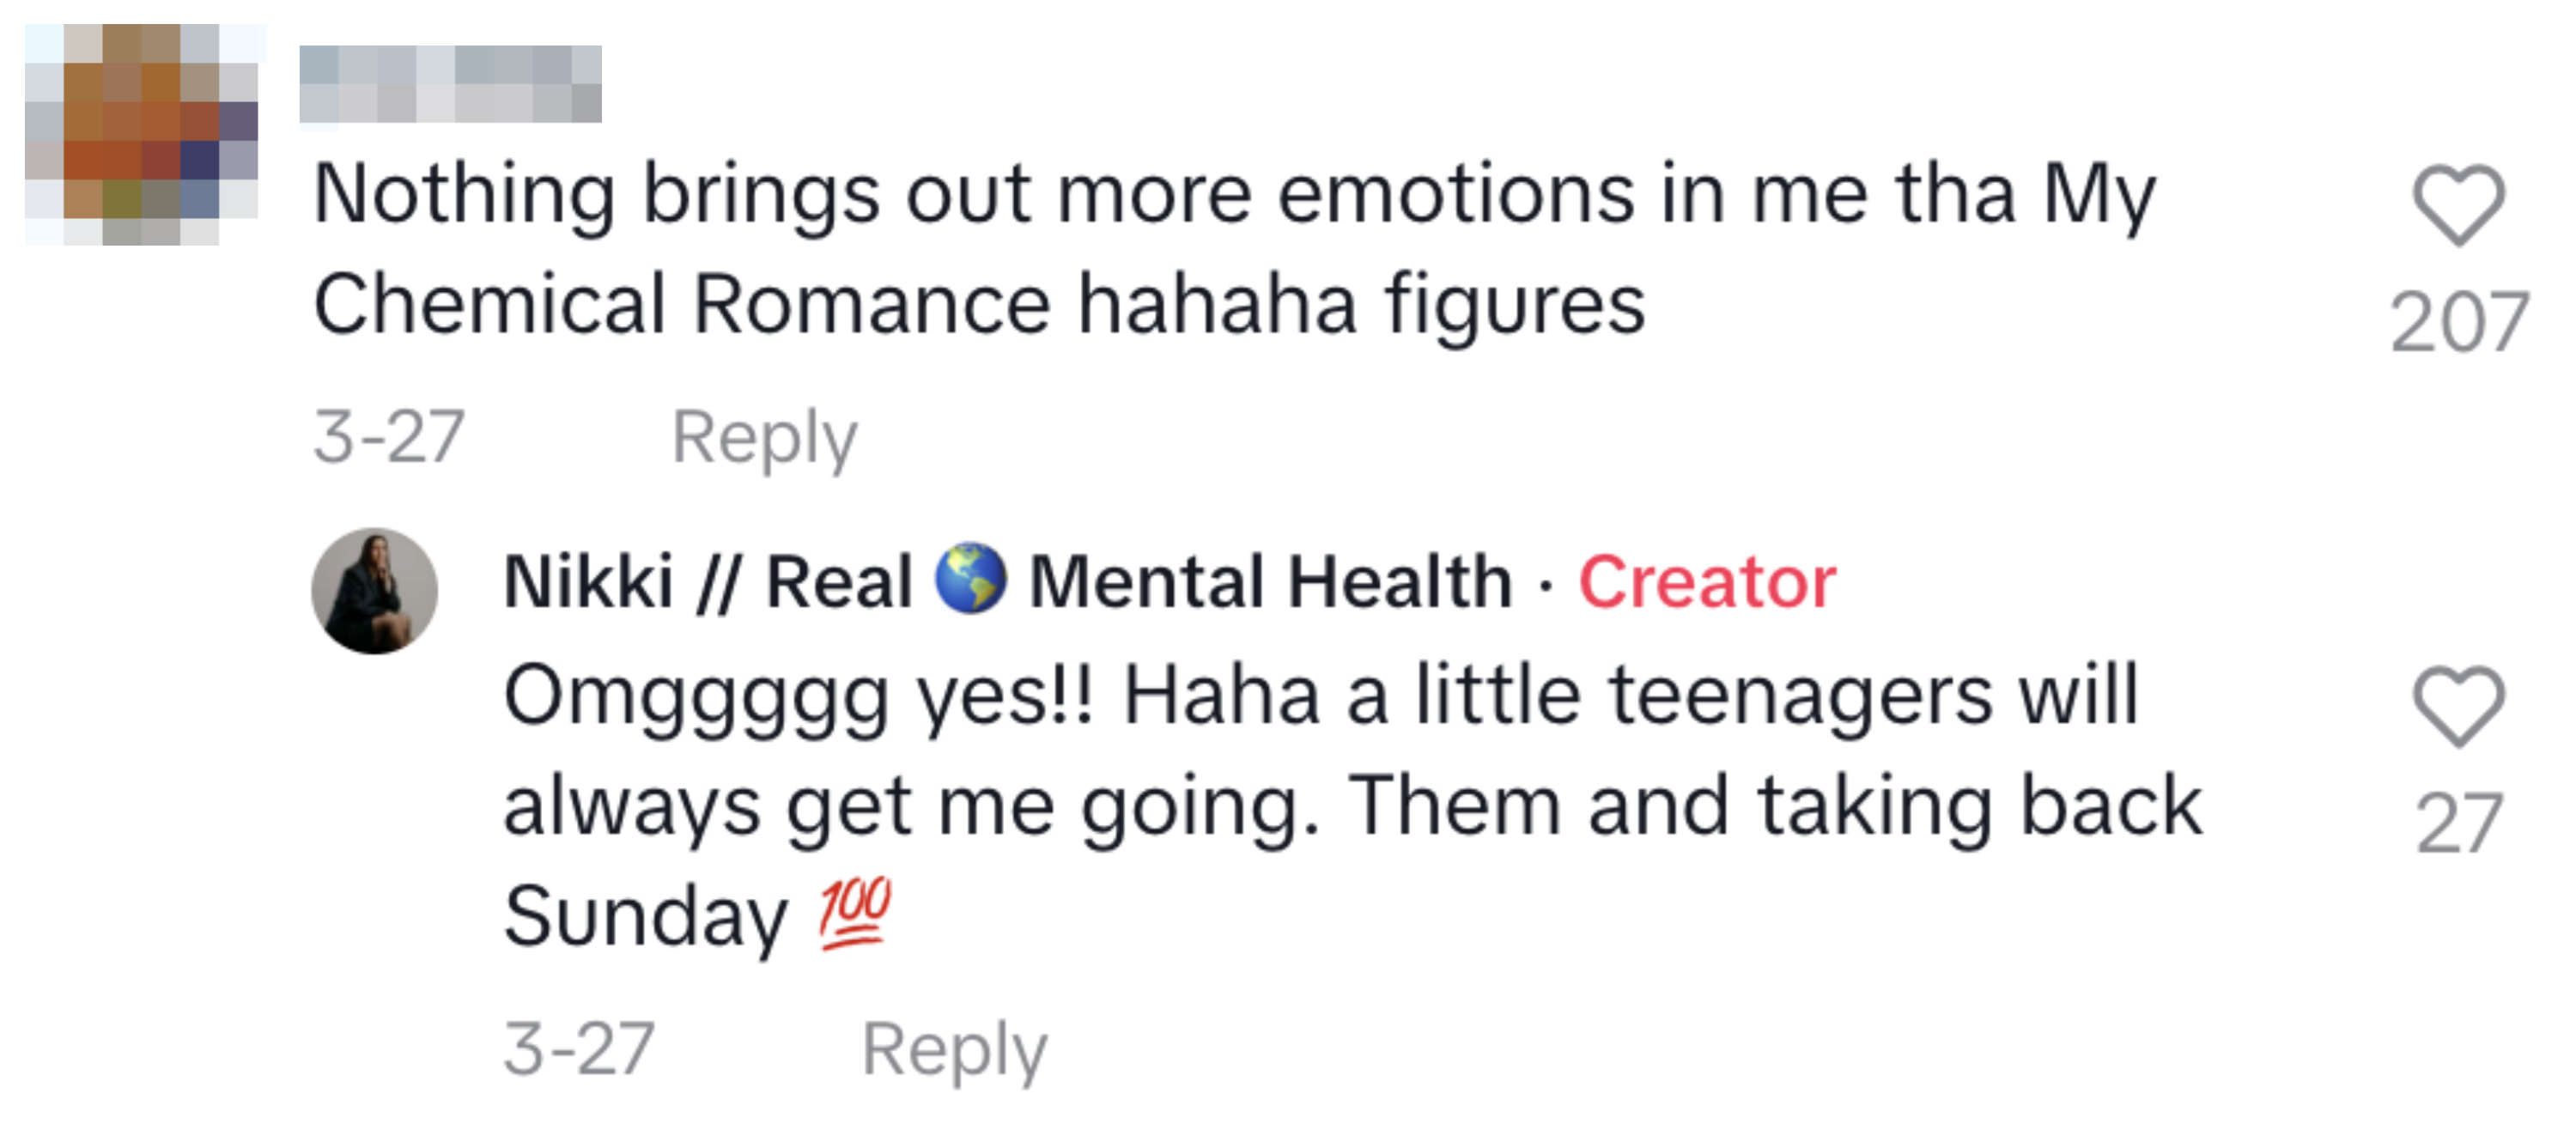 Comment exchange on a post discussing emotional responses, one mentioning nostalgia with teenagers and music